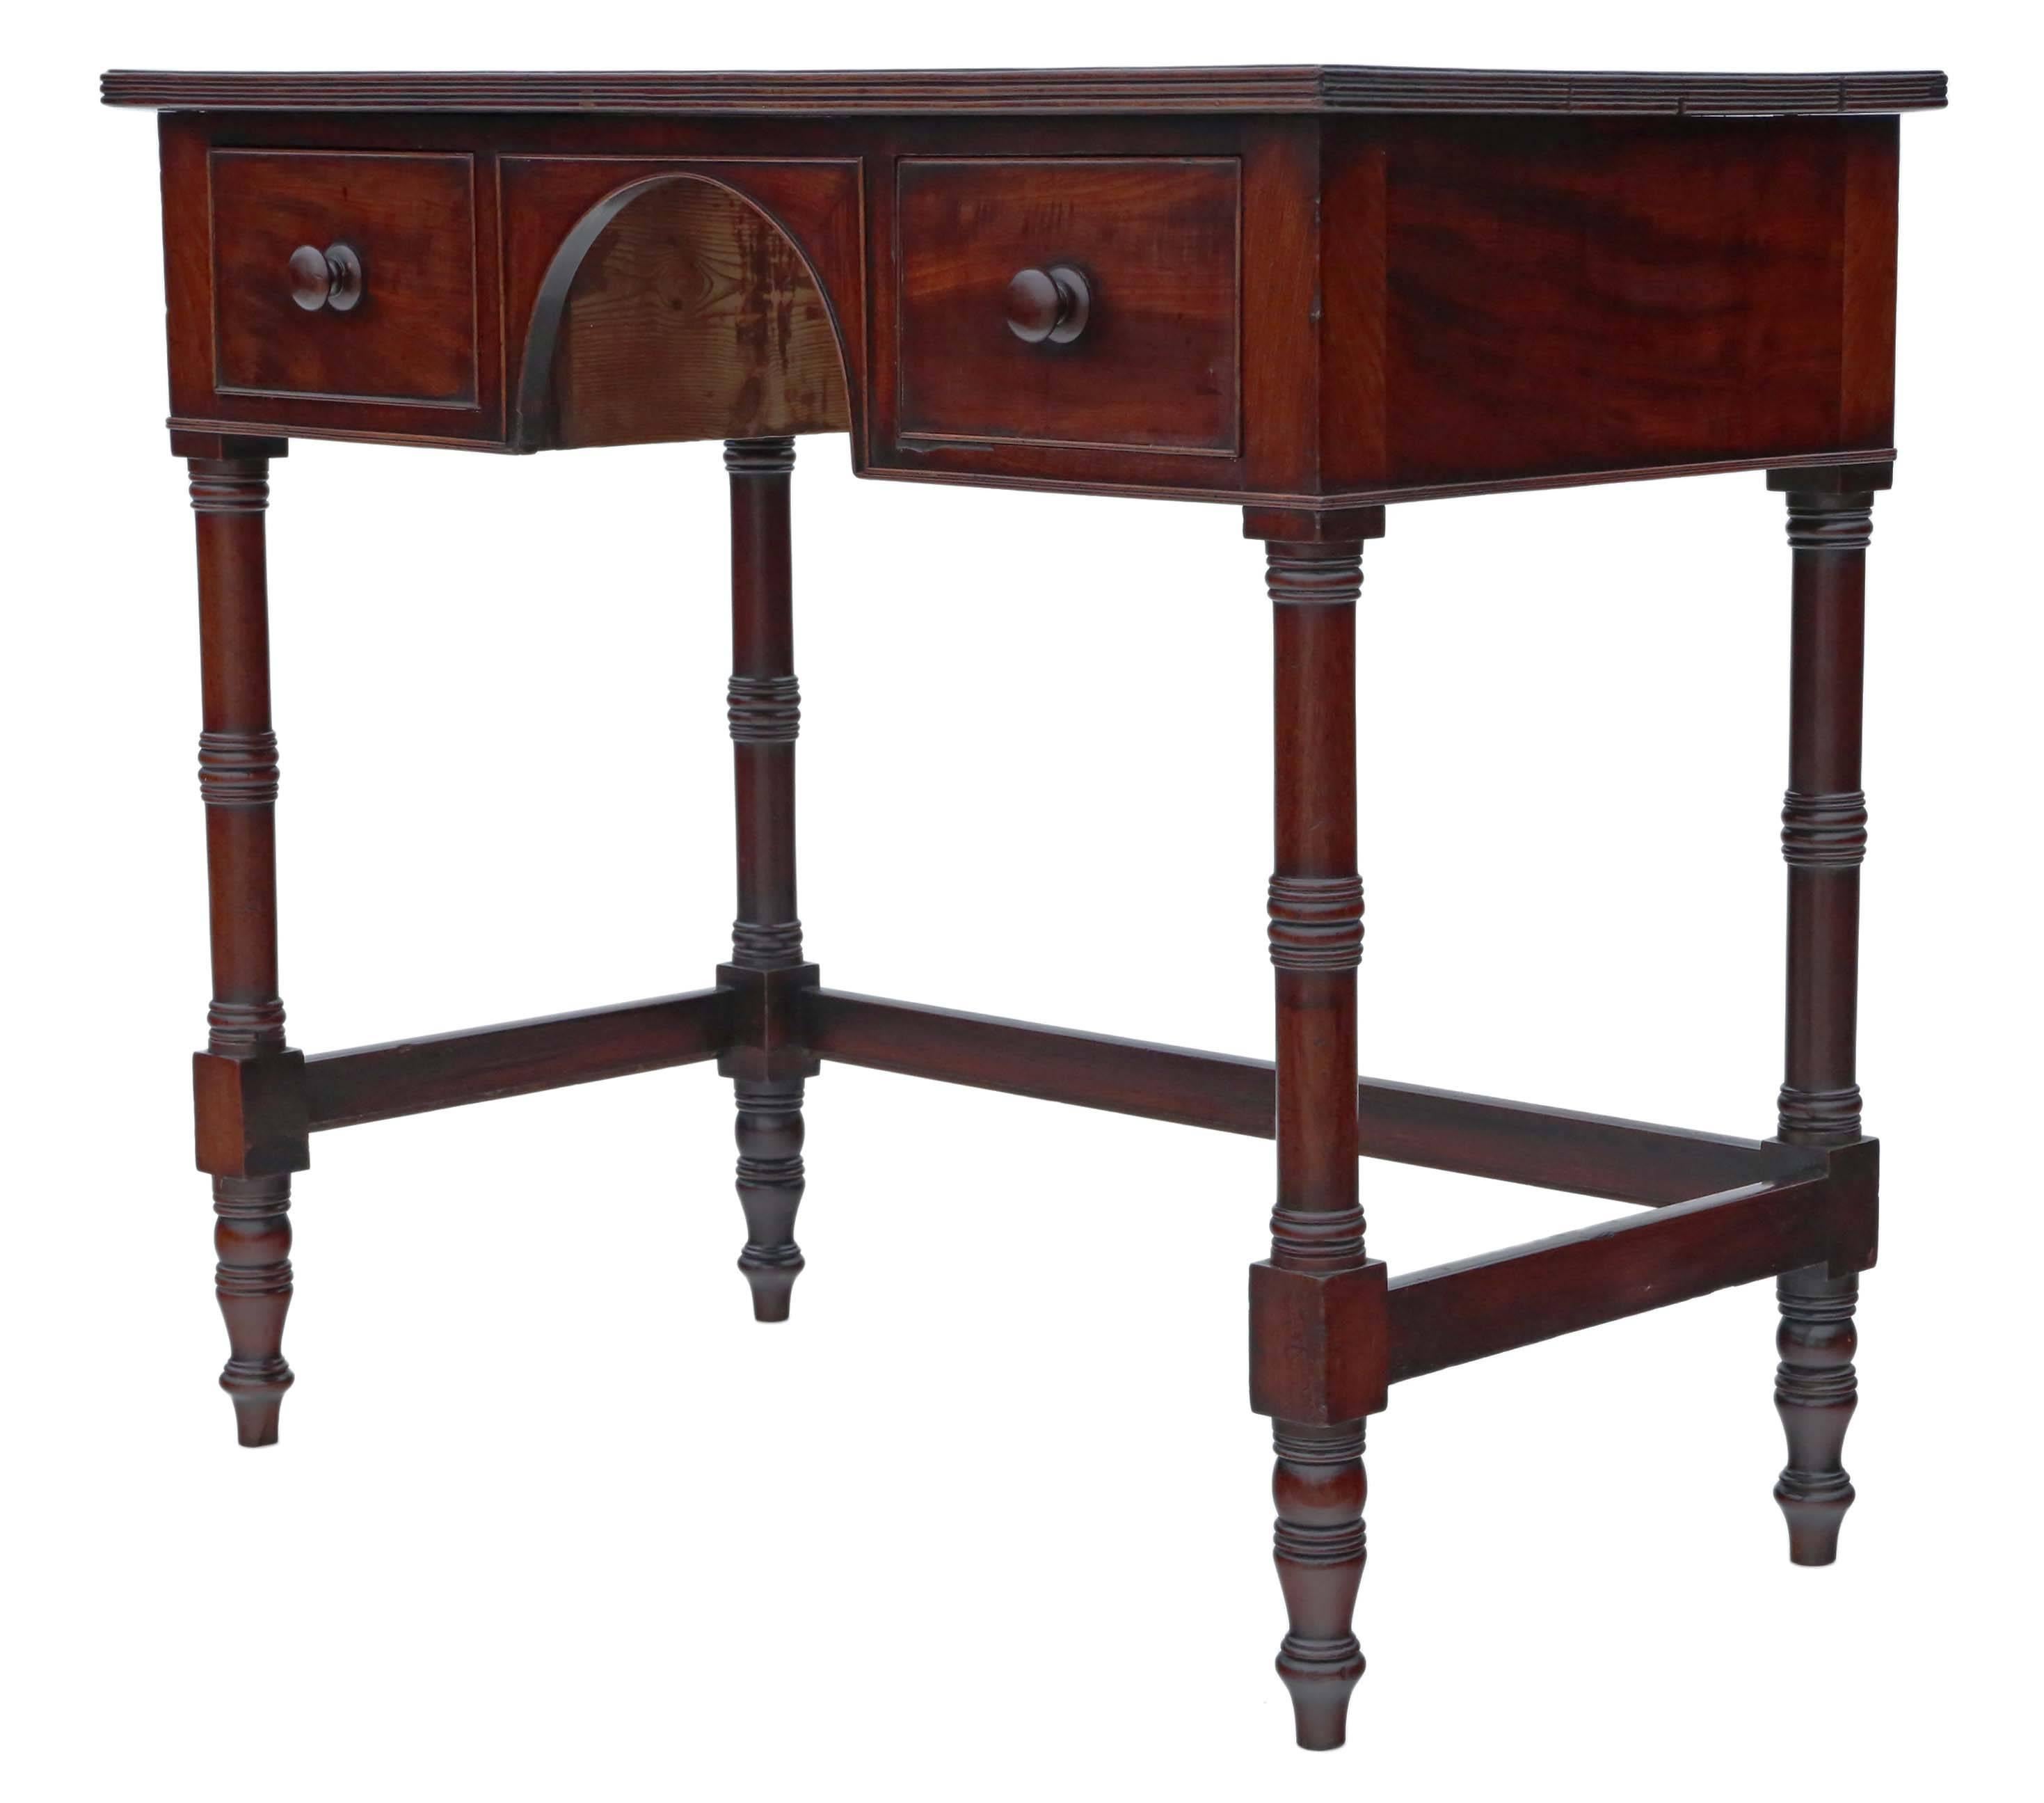 Early 19th Century Antique Regency circa 1825 and Later Mahogany Desk or Writing Table For Sale